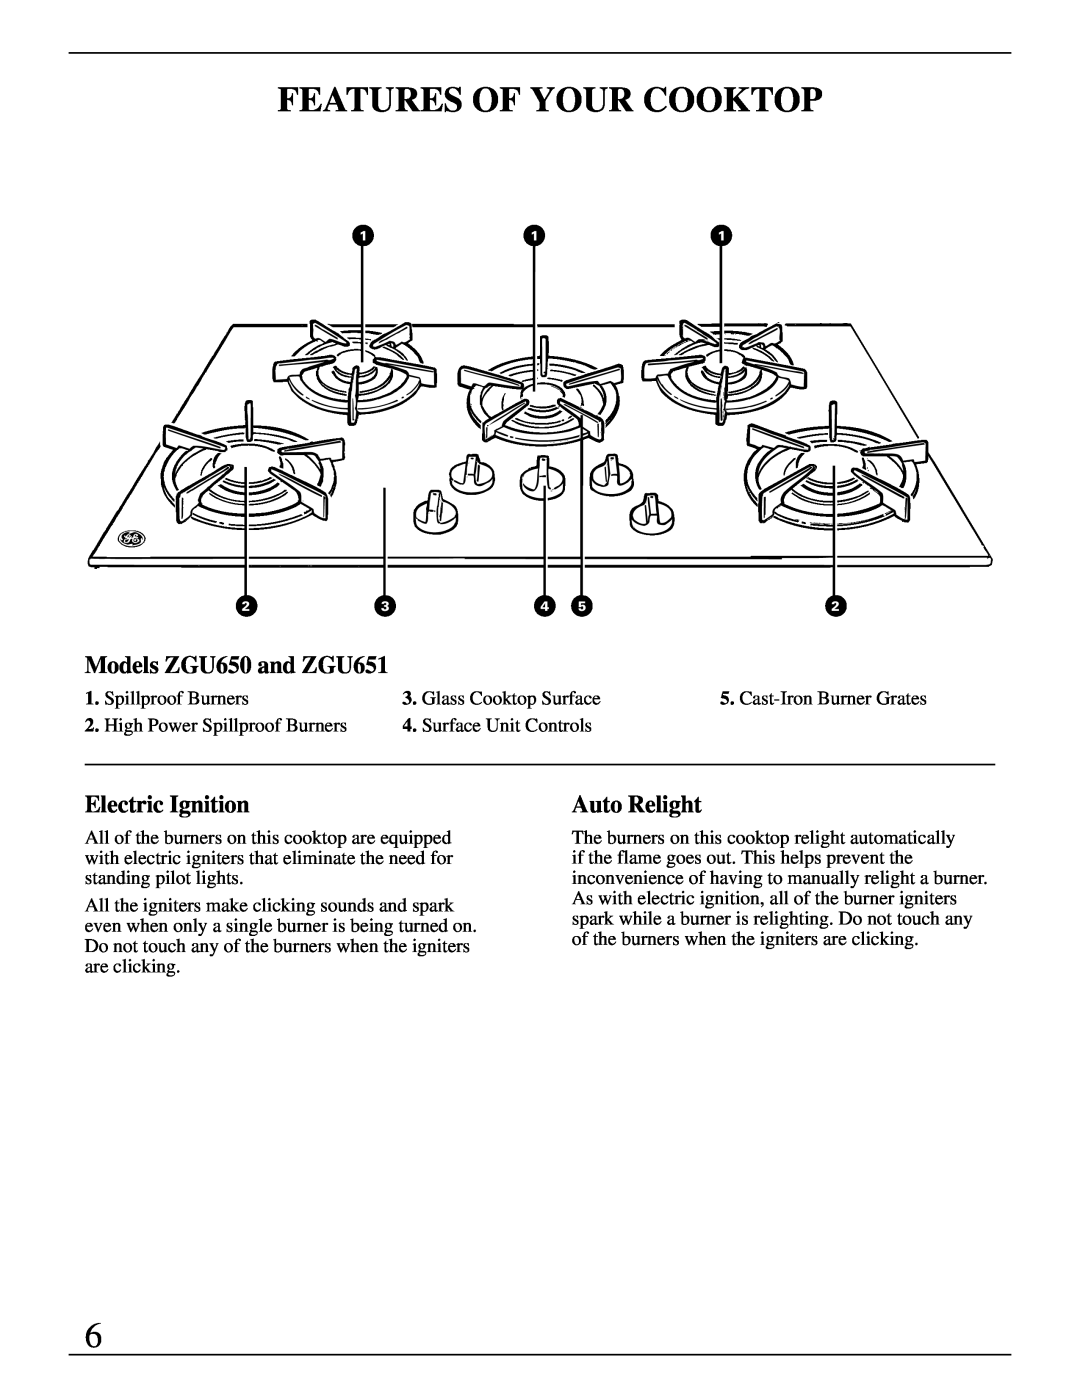 GE Monogram manual Features Of Your Cooktop, Models ZGU650 and ZGU651, Electric Ignition, Auto Relight 